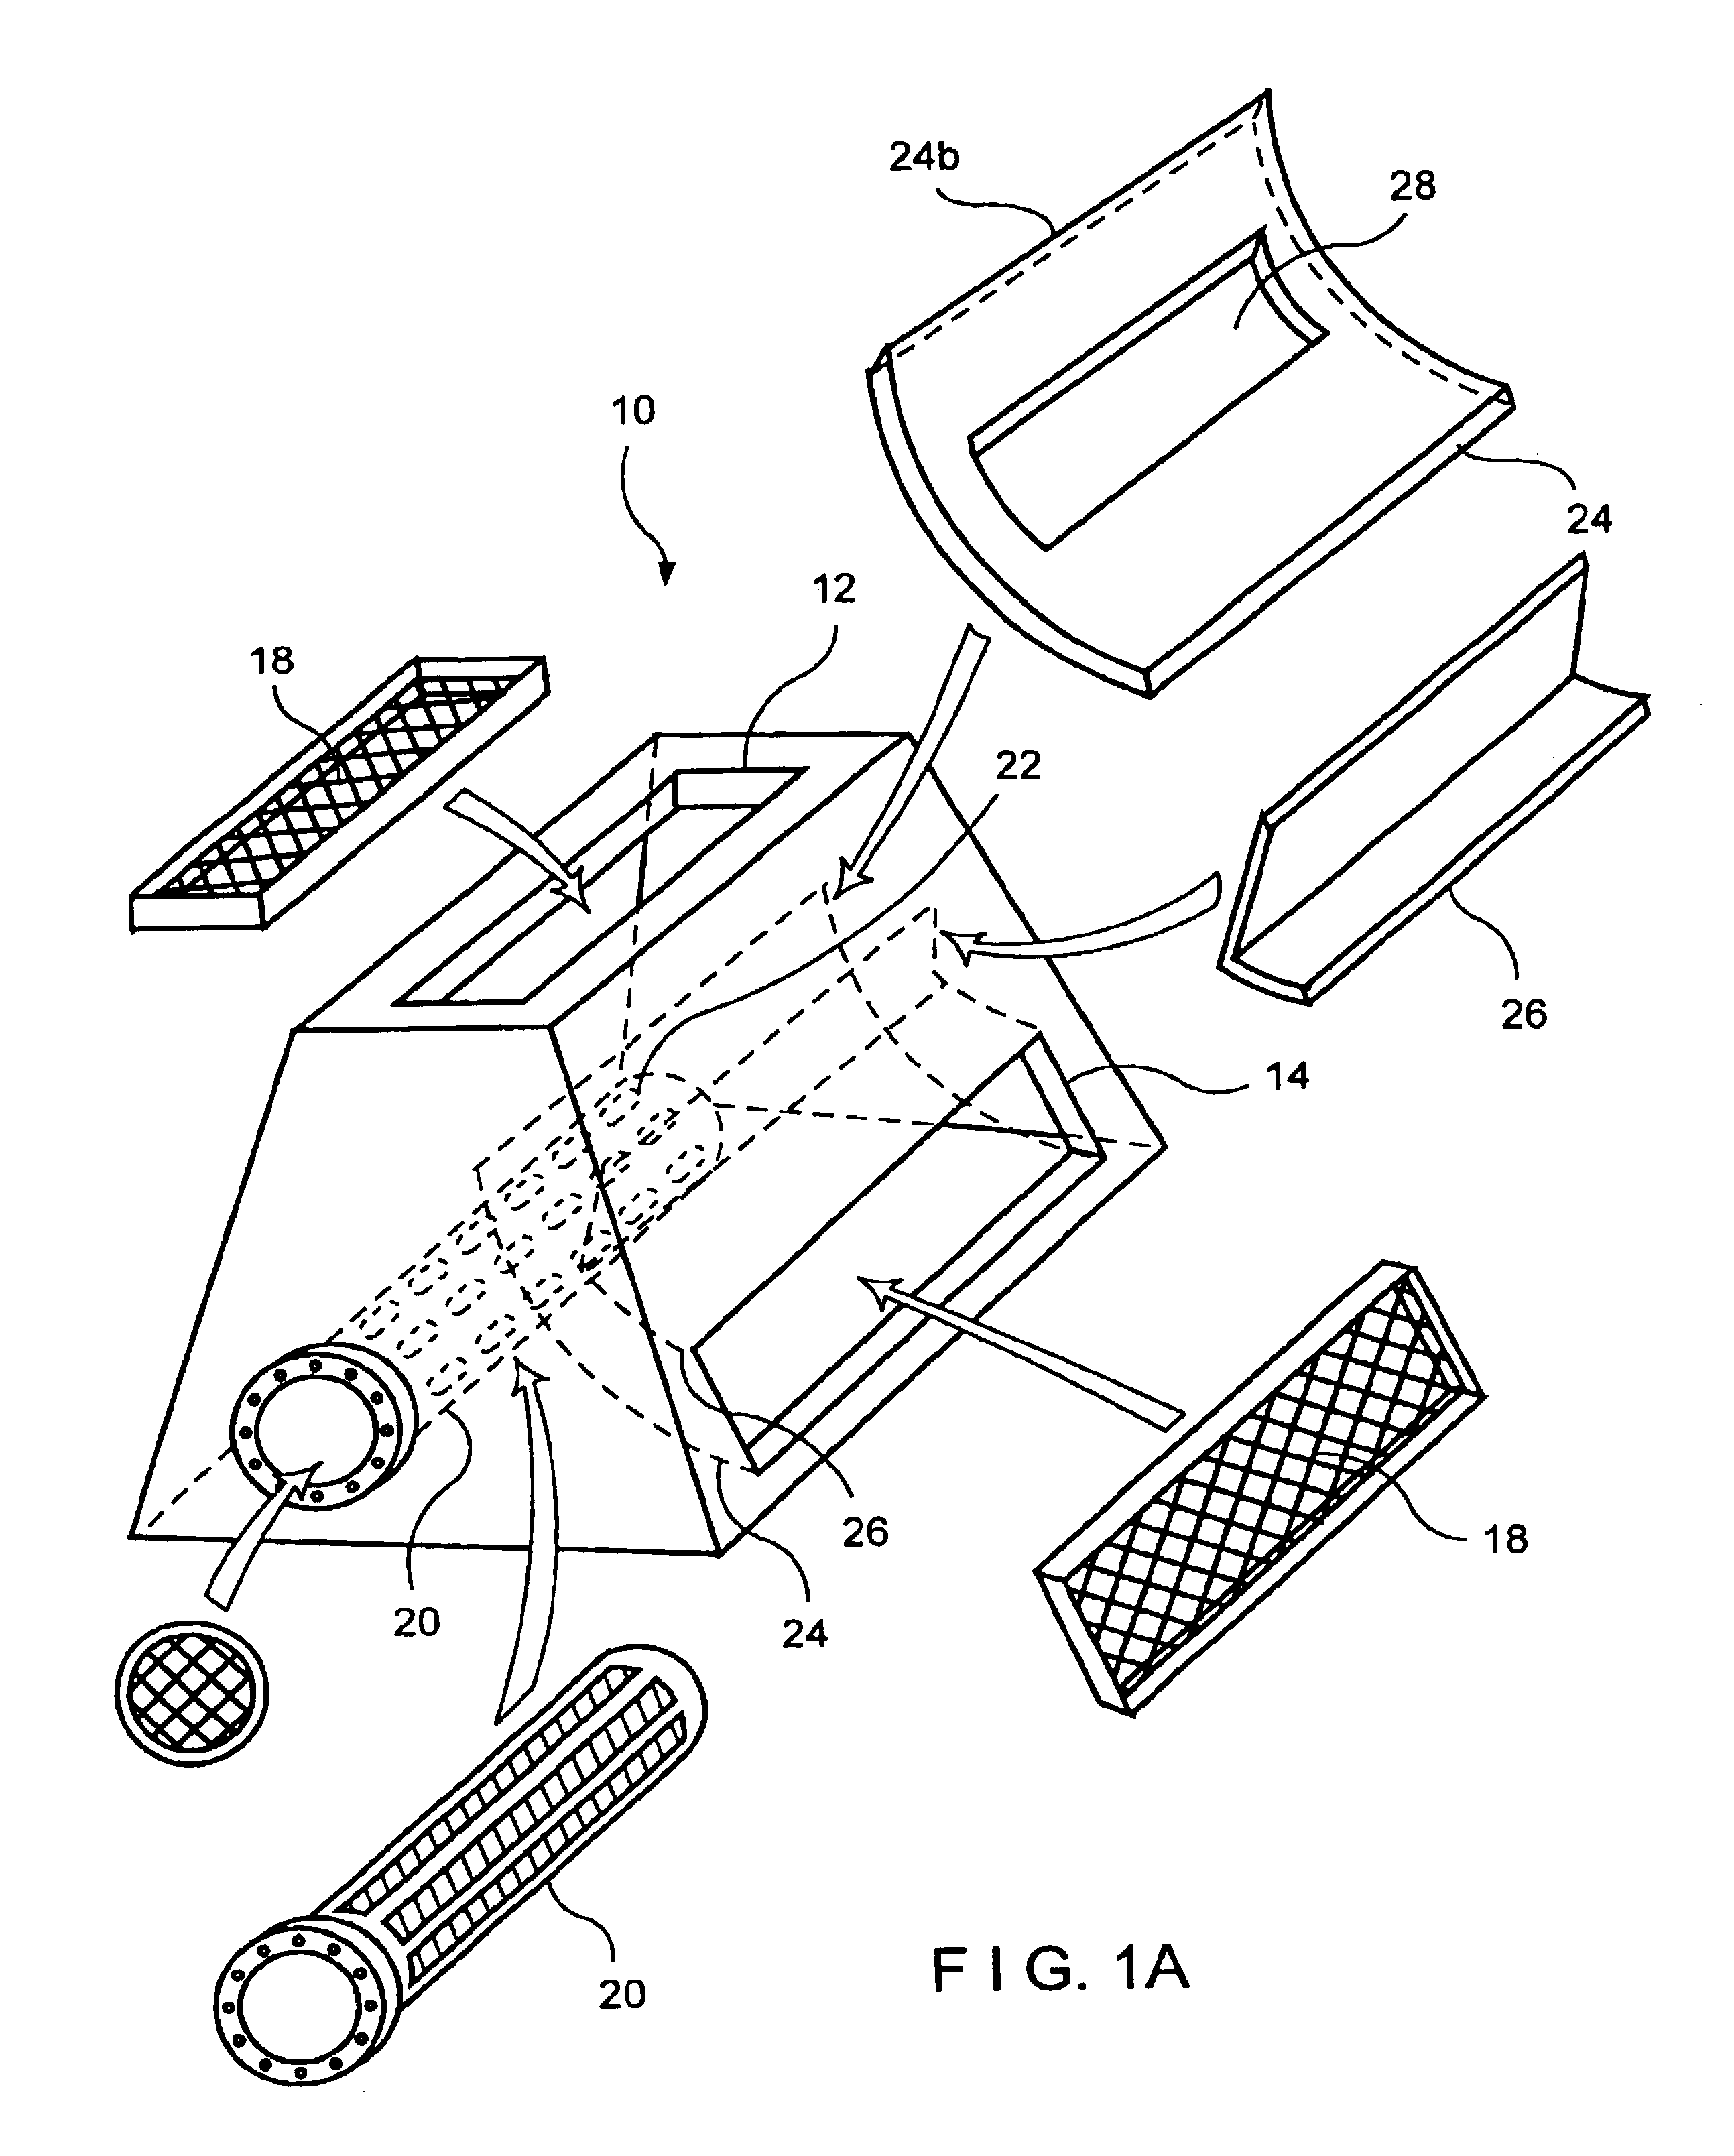 Flow control suction barrier apparatus and system